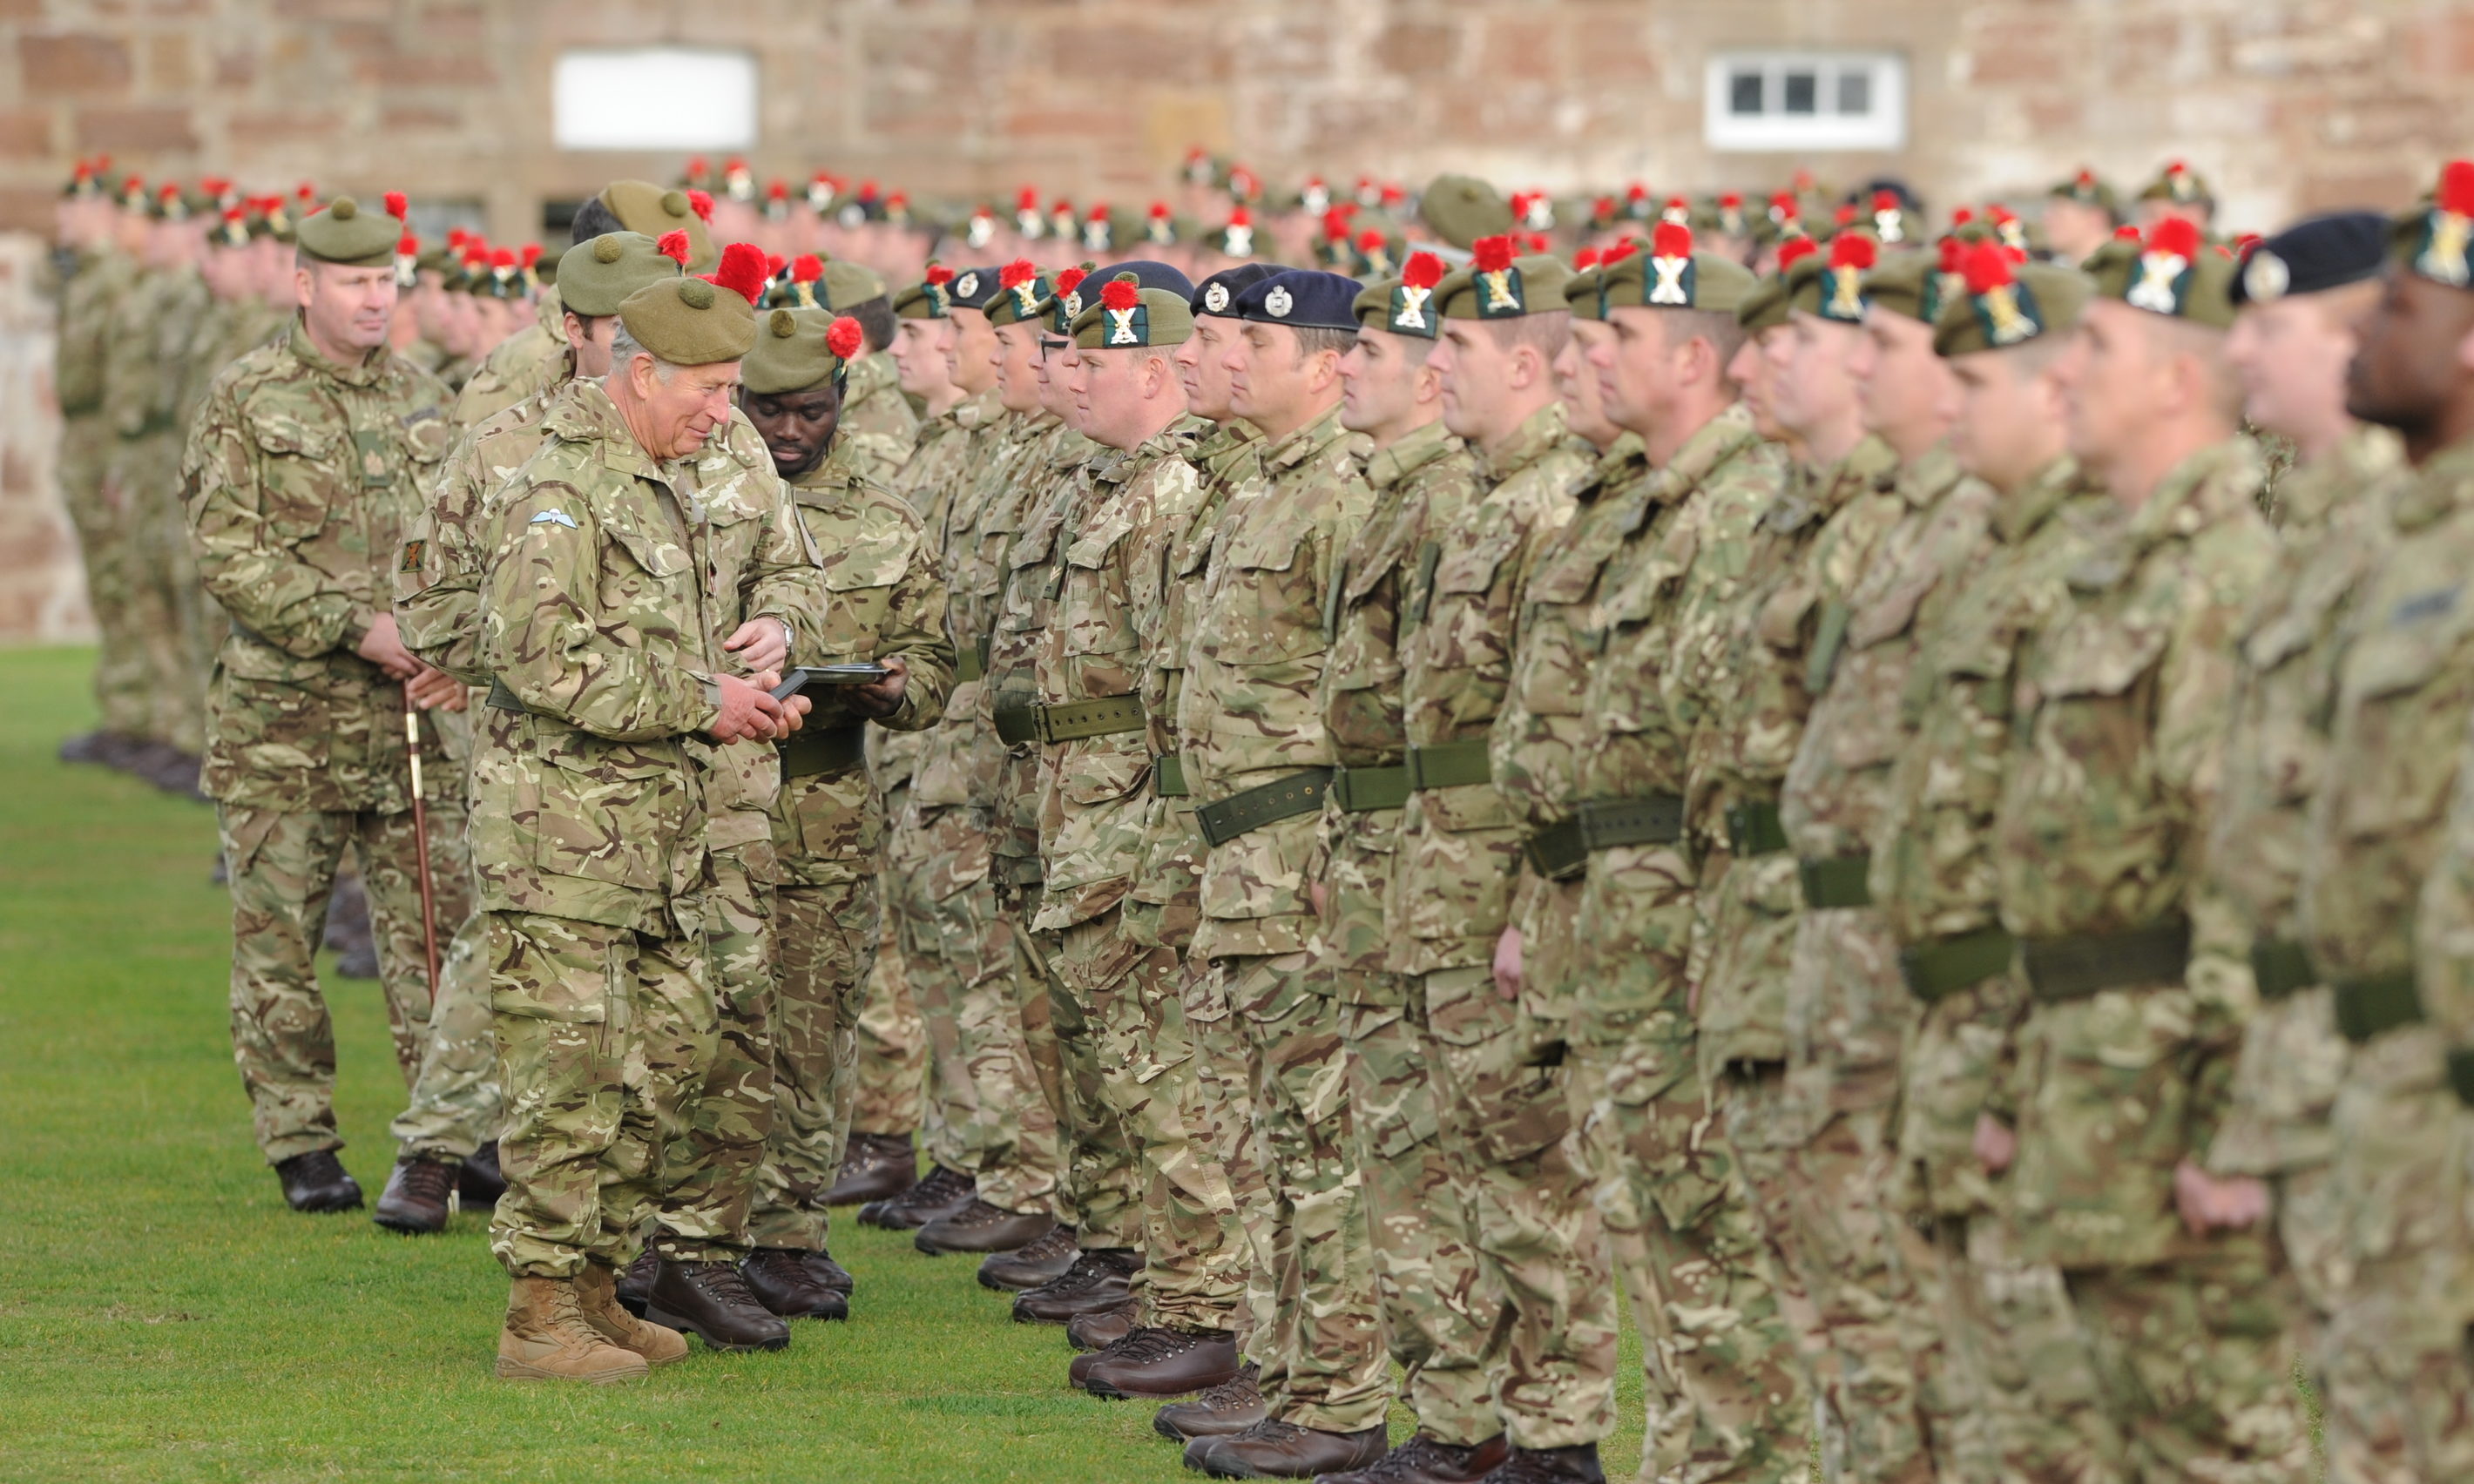 The Duke of Rothesay presenting 3 Scots soldiers with medals to commemorate their tour of Iraq at Fort George.